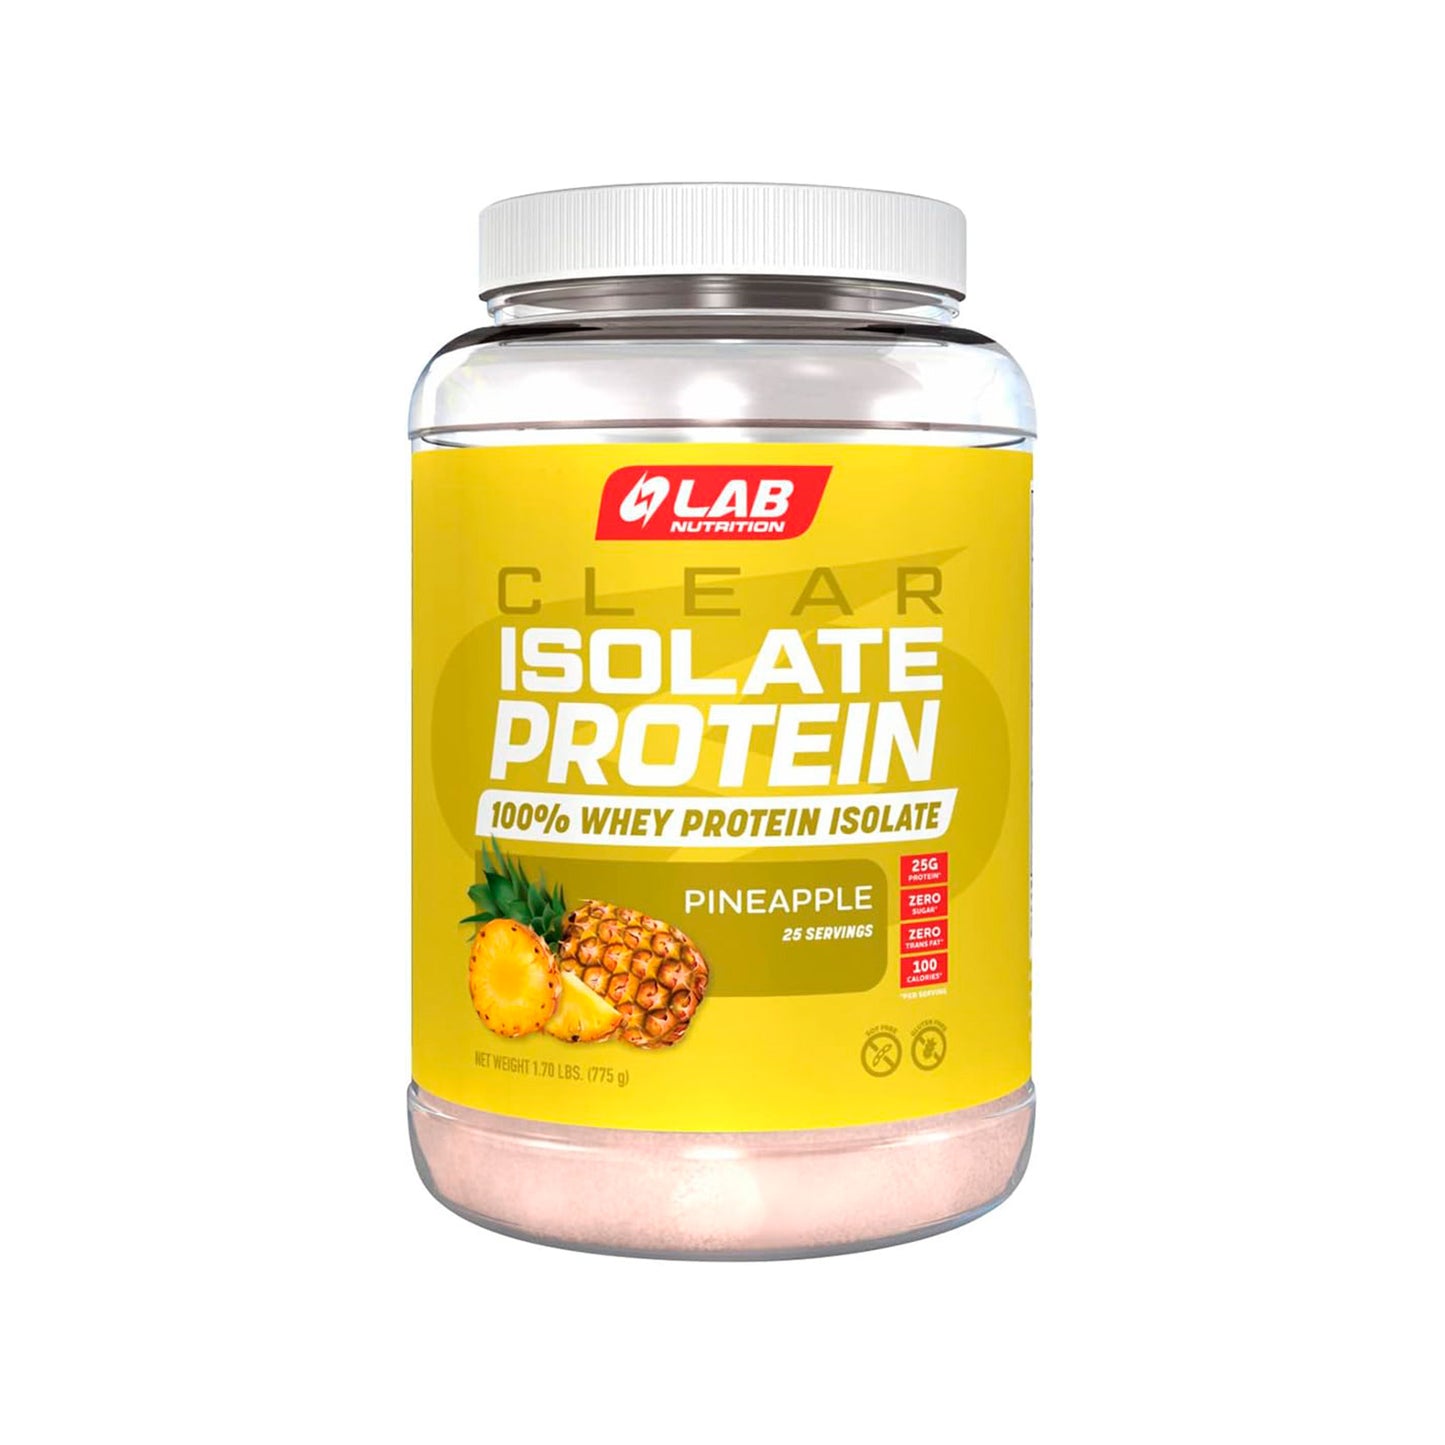 CLEAR ISOLATE PROTEIN 100% WHEY PROTEIN ISOLATE PINEAPPLE